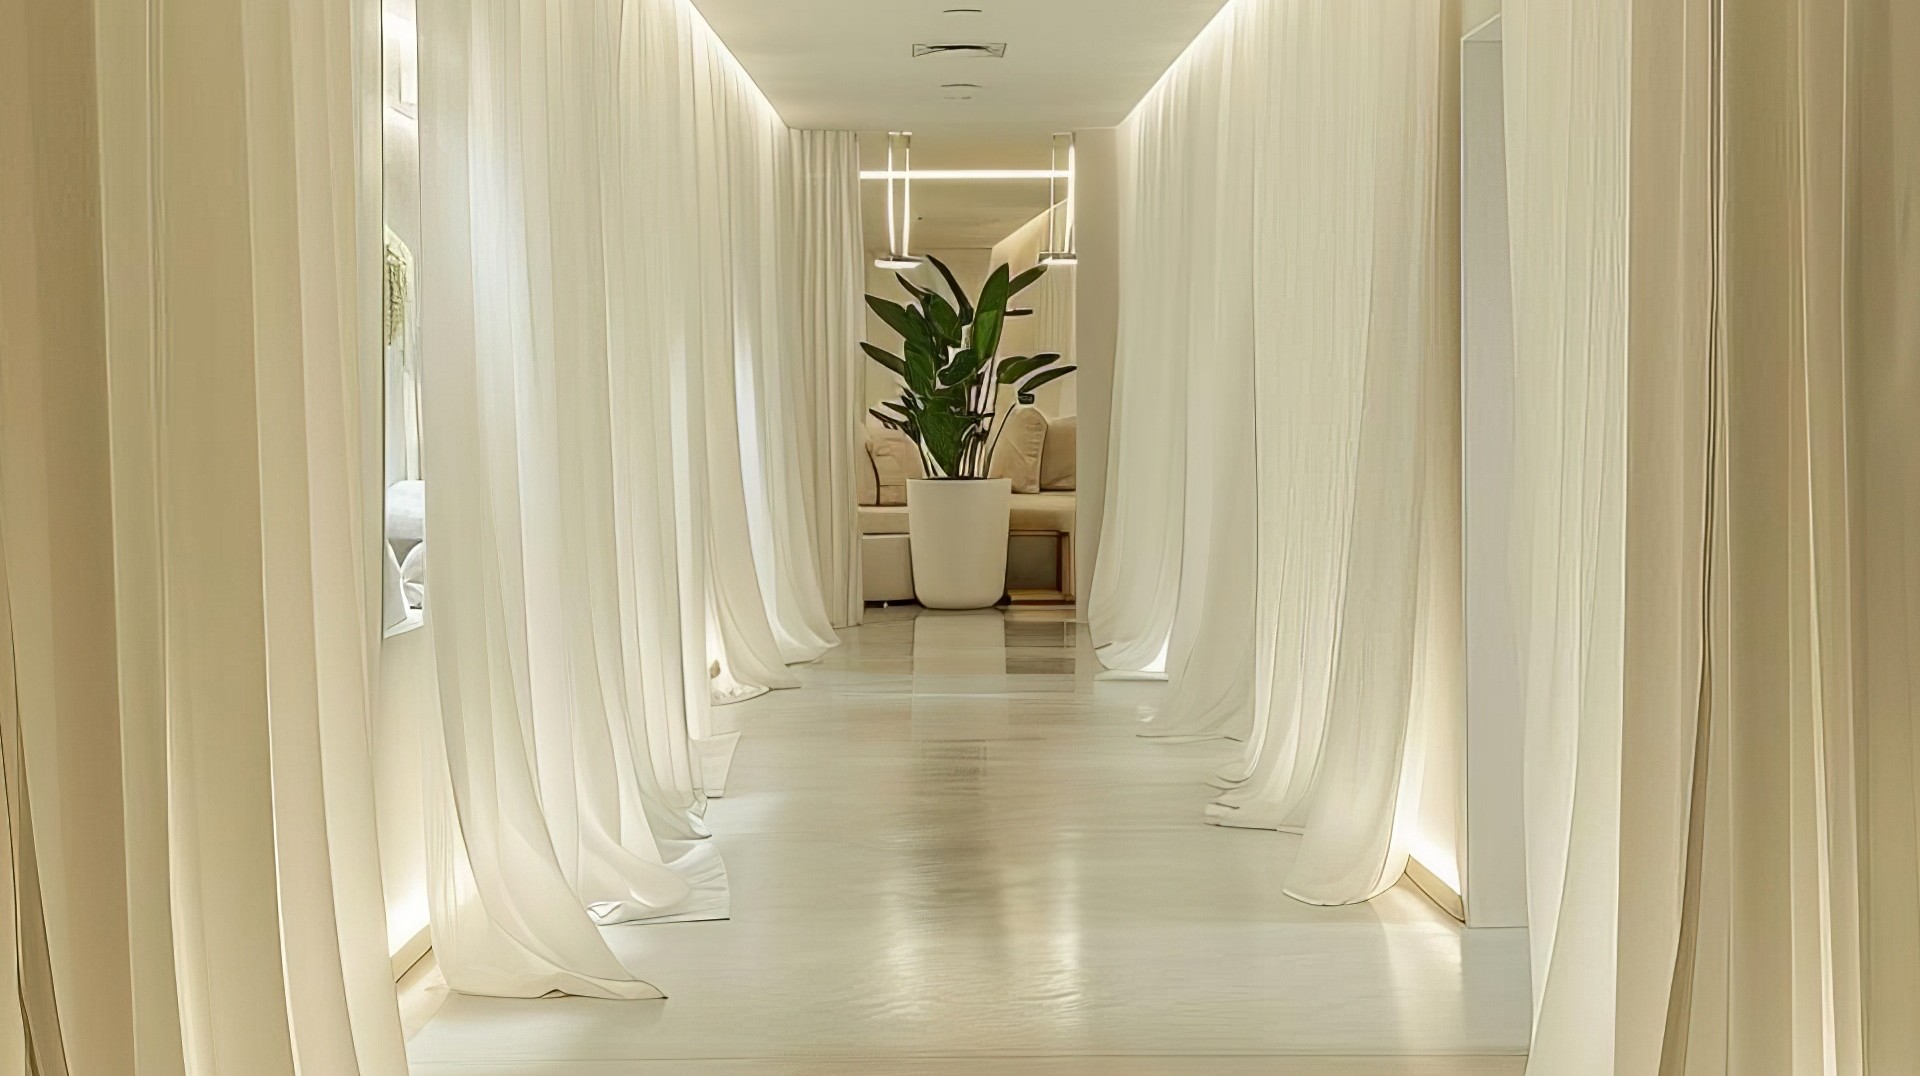 A corridor lined with floor to ceiling height, full-length curtains